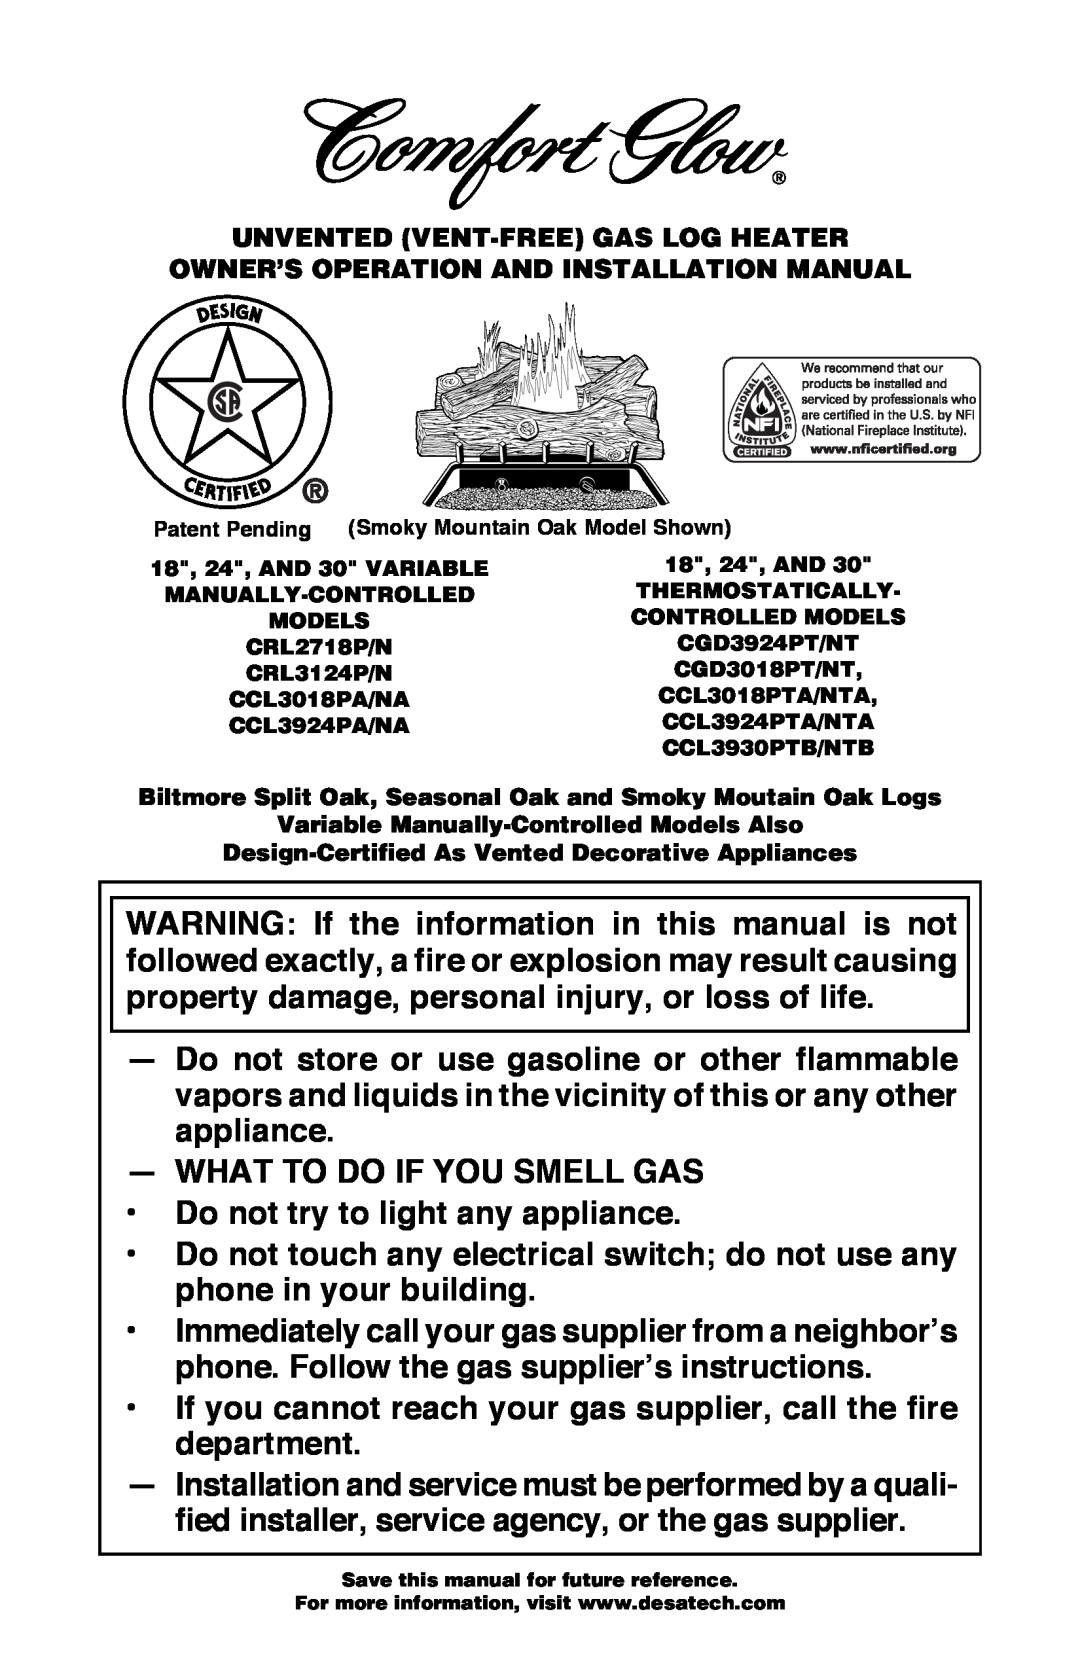 Desa CRL3124P/N, CRL2718P/N, CGD3018PT/NT, CGD3924PT/NT installation manual What To Do If You Smell Gas 